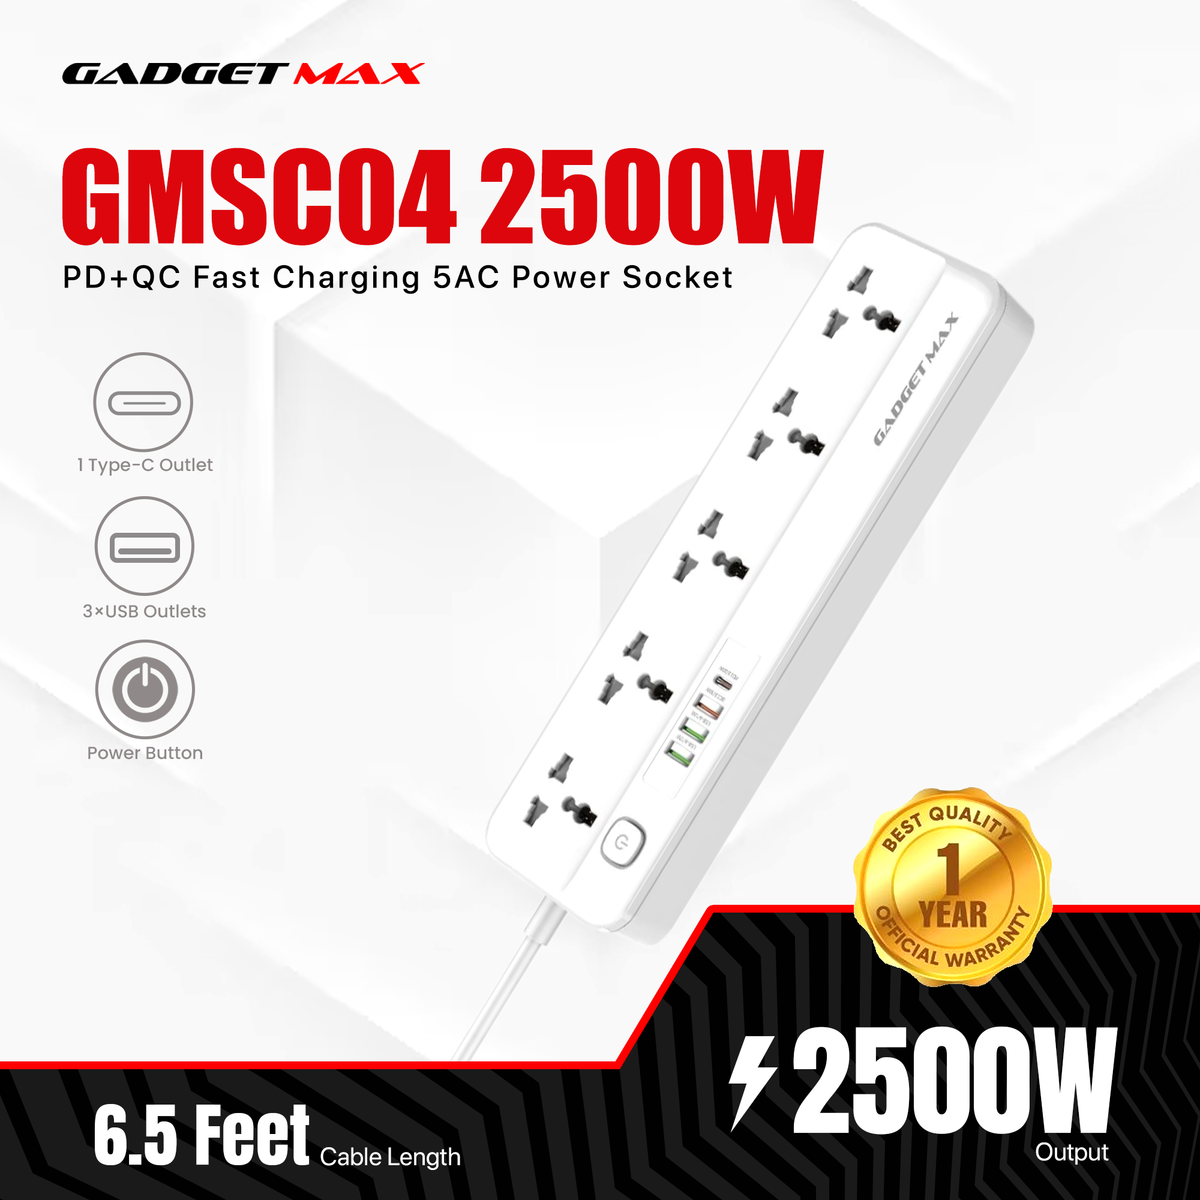 GADGET MAX GMSC04 2500W PD+QC FAST CHARGING 5AC POWER SOCKET WITH 6.5 FEET CABLE LENGTH